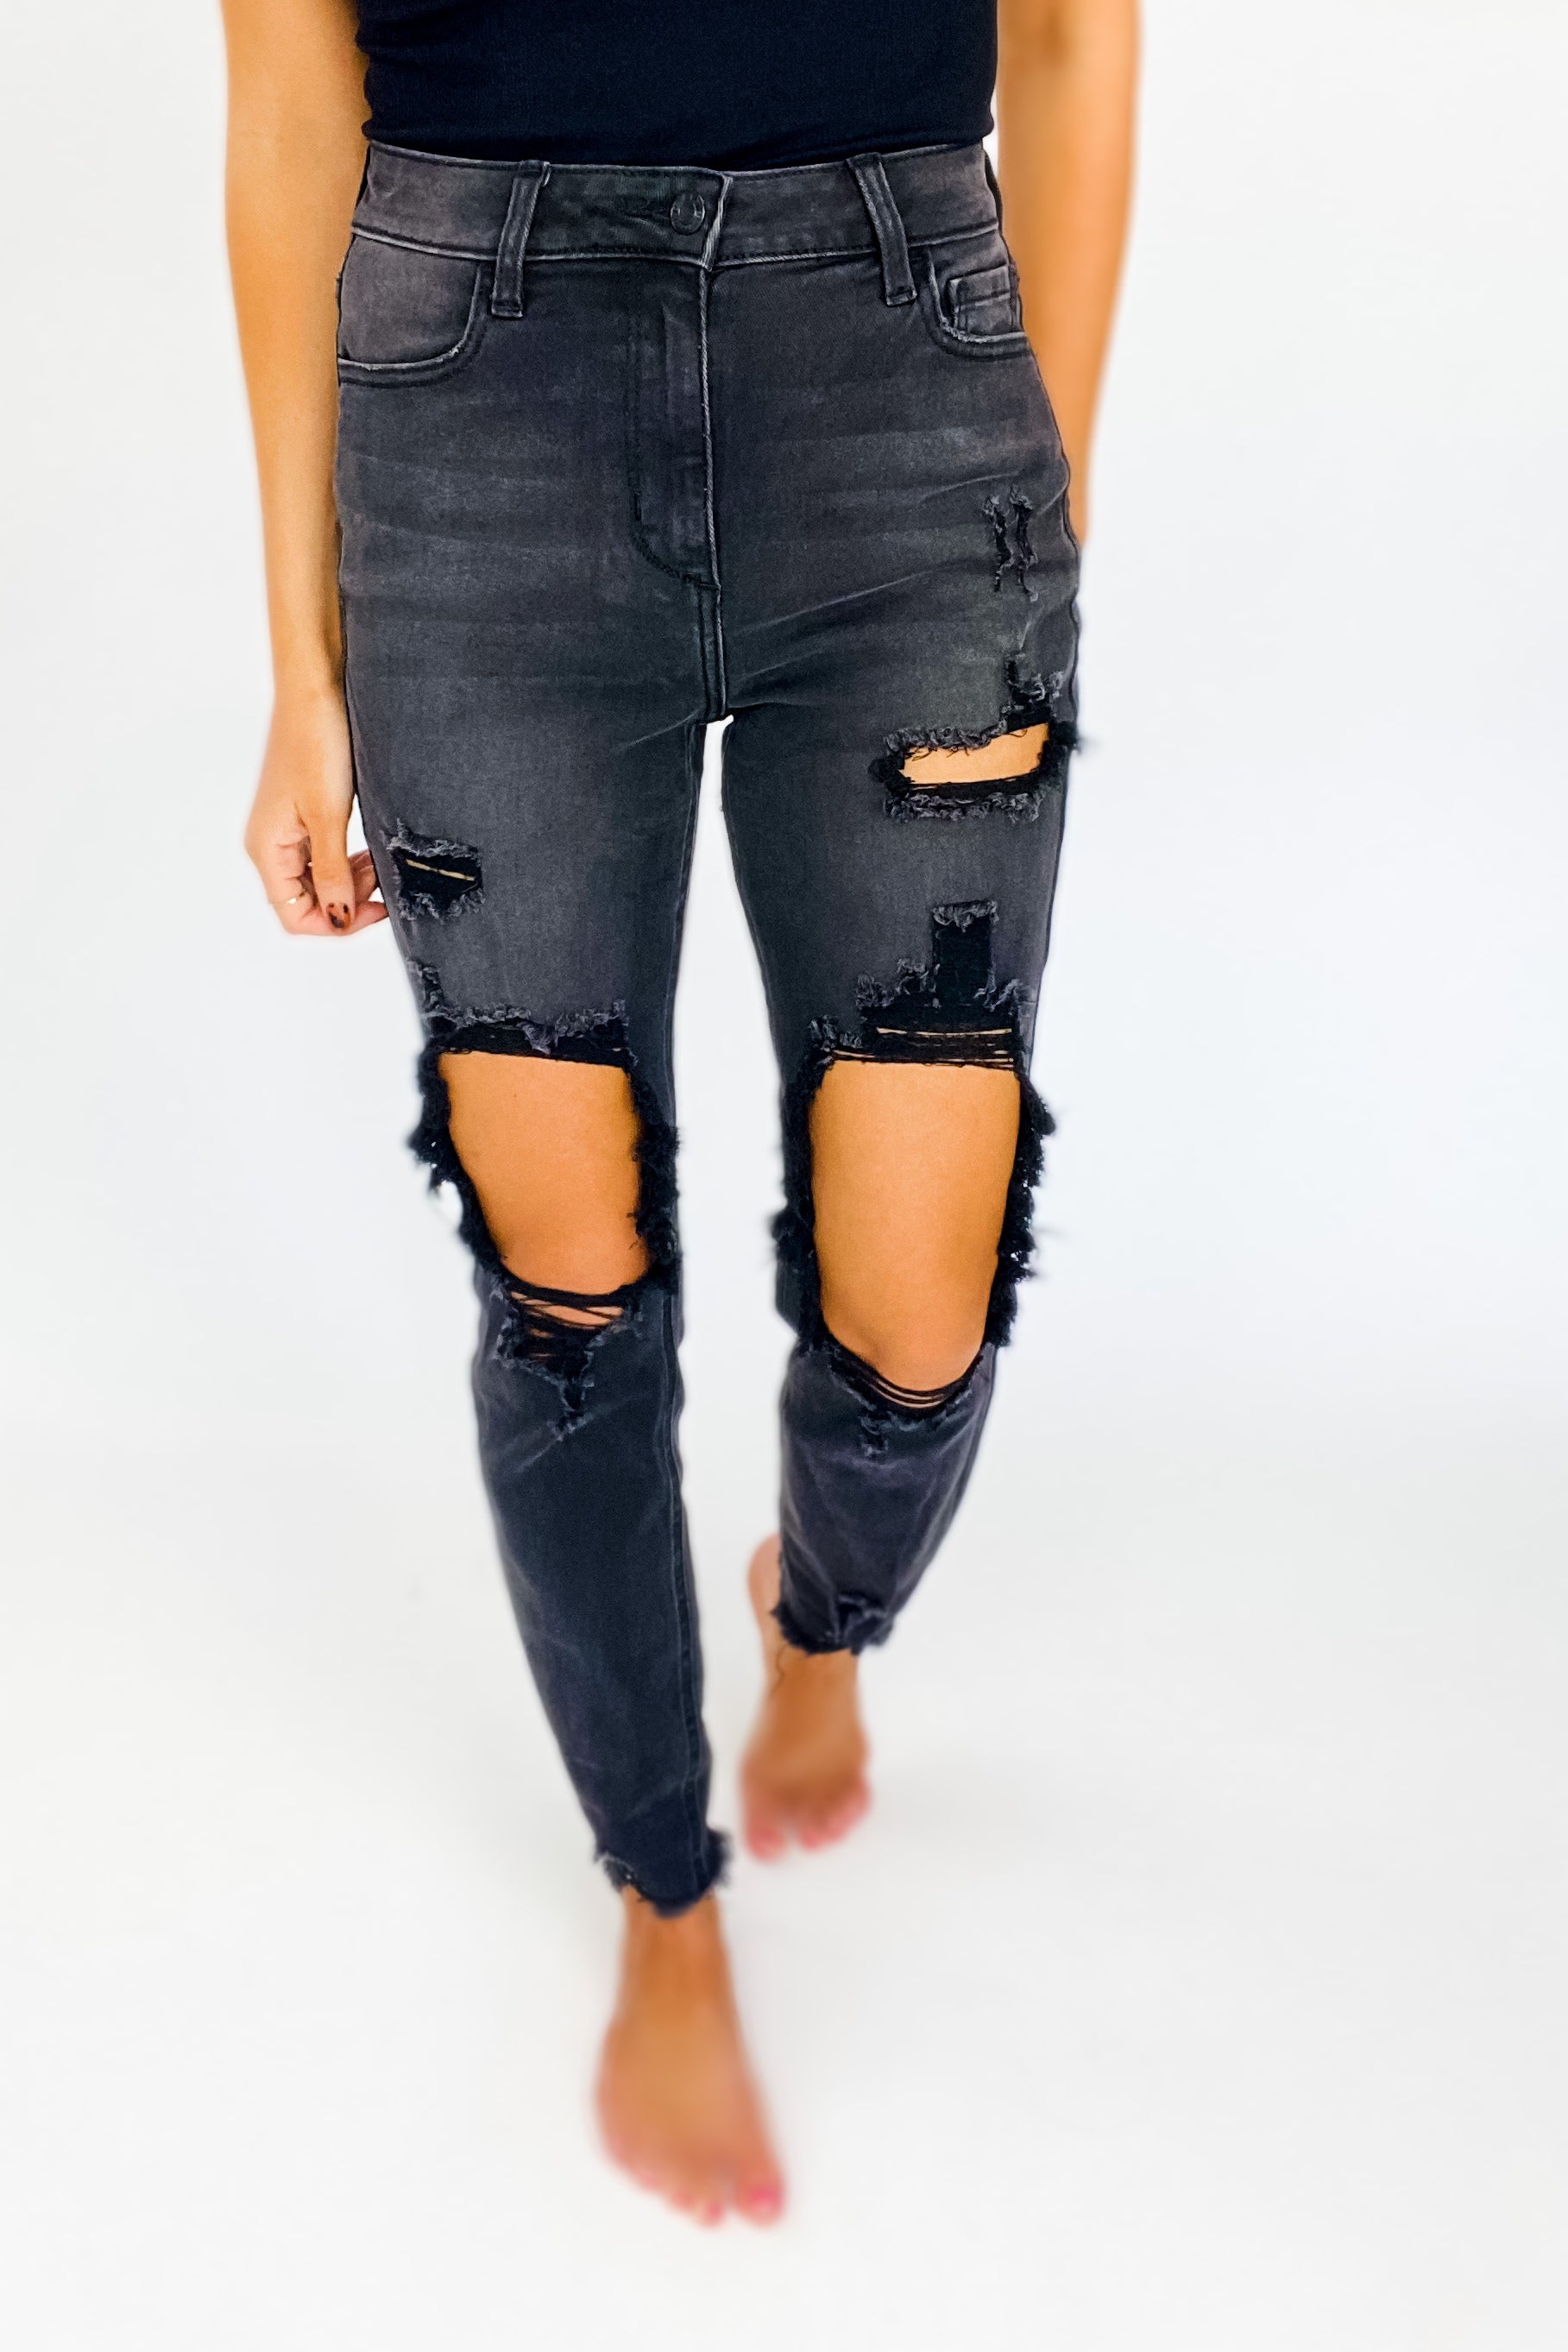 SAINT CUT OUT MOM SKINNY BY CELLO - FINAL SALE – Boutique